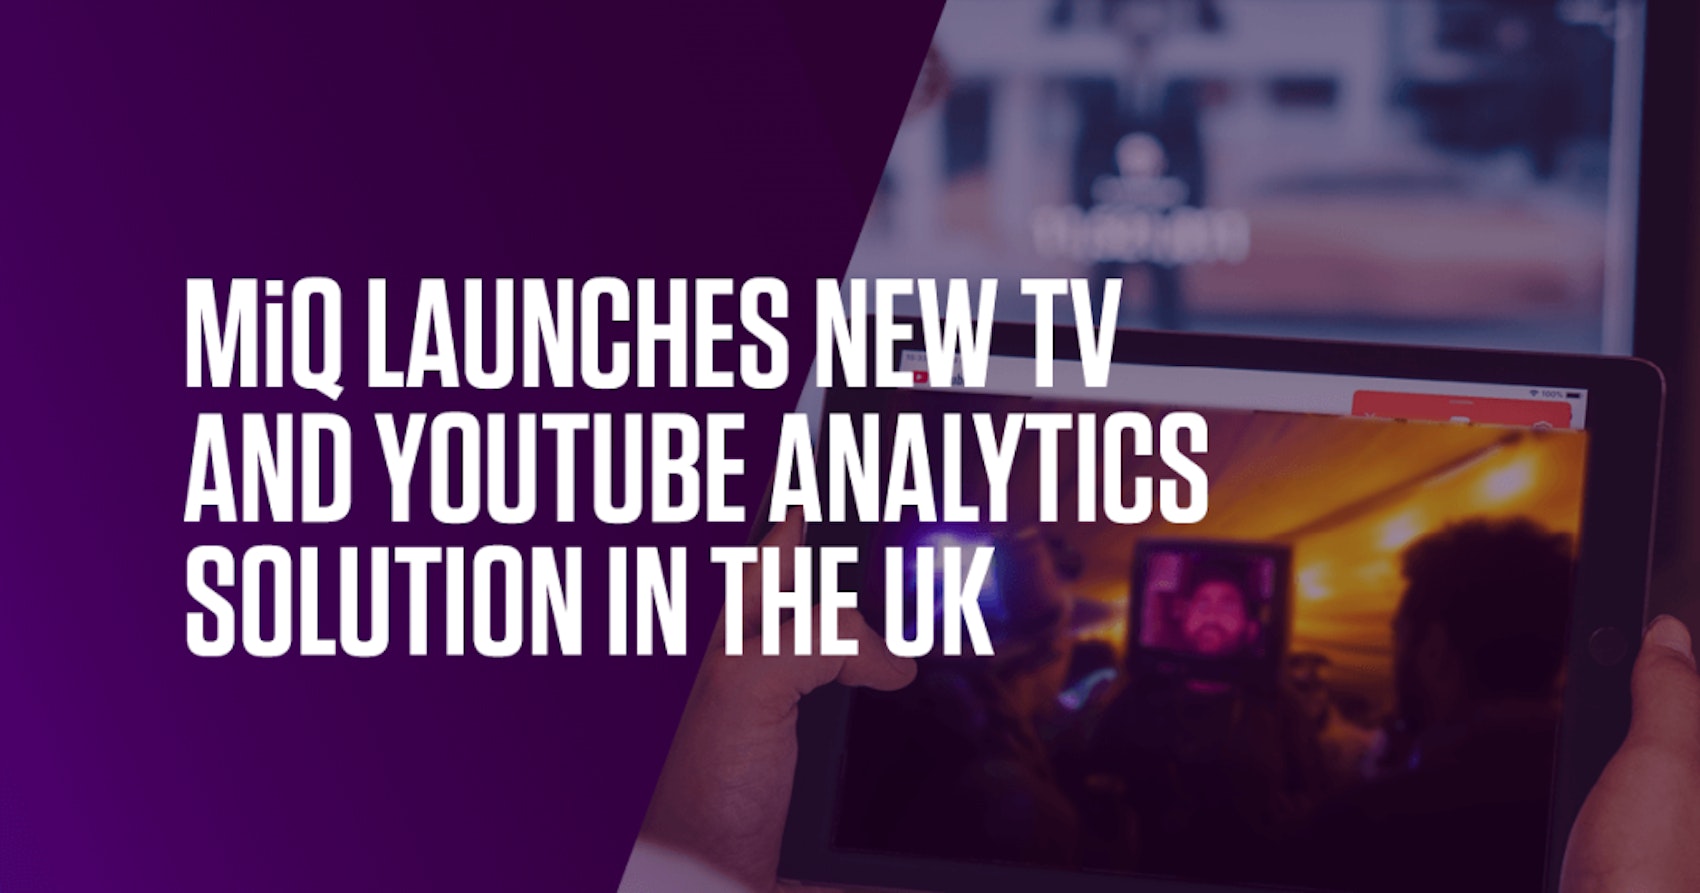 MiQ’s YouTube and TV Analytics capability officially lands in the UK